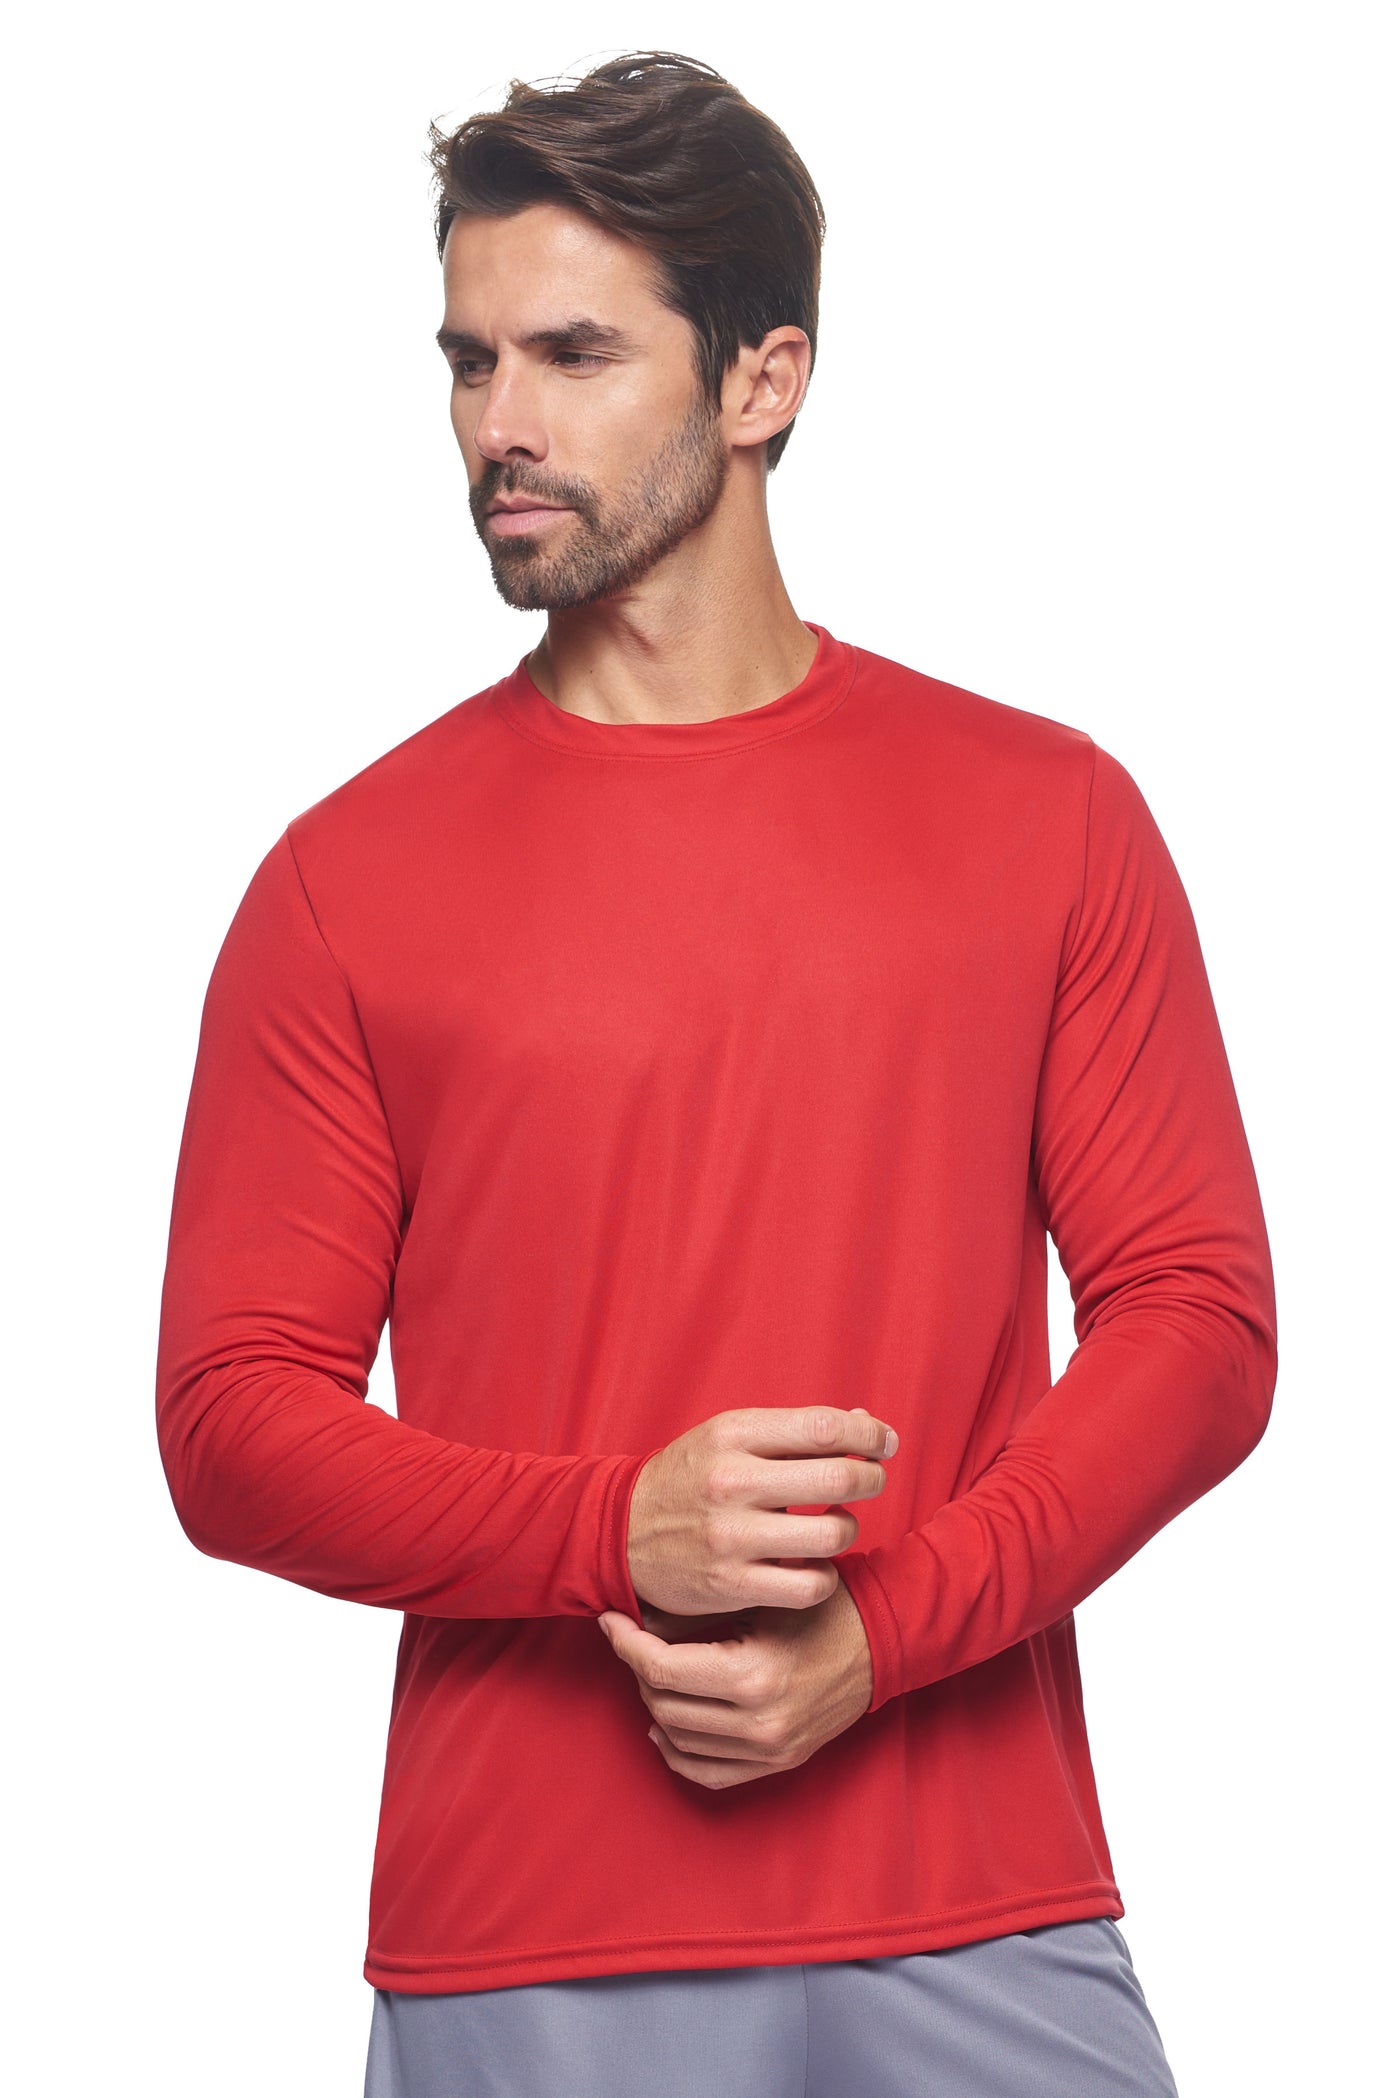 Expert Brand Retail Activewear Men's Sportswear Performance Fitness Crewneck Long Sleeve Tec Shirt Made in USA in red#color_true-red